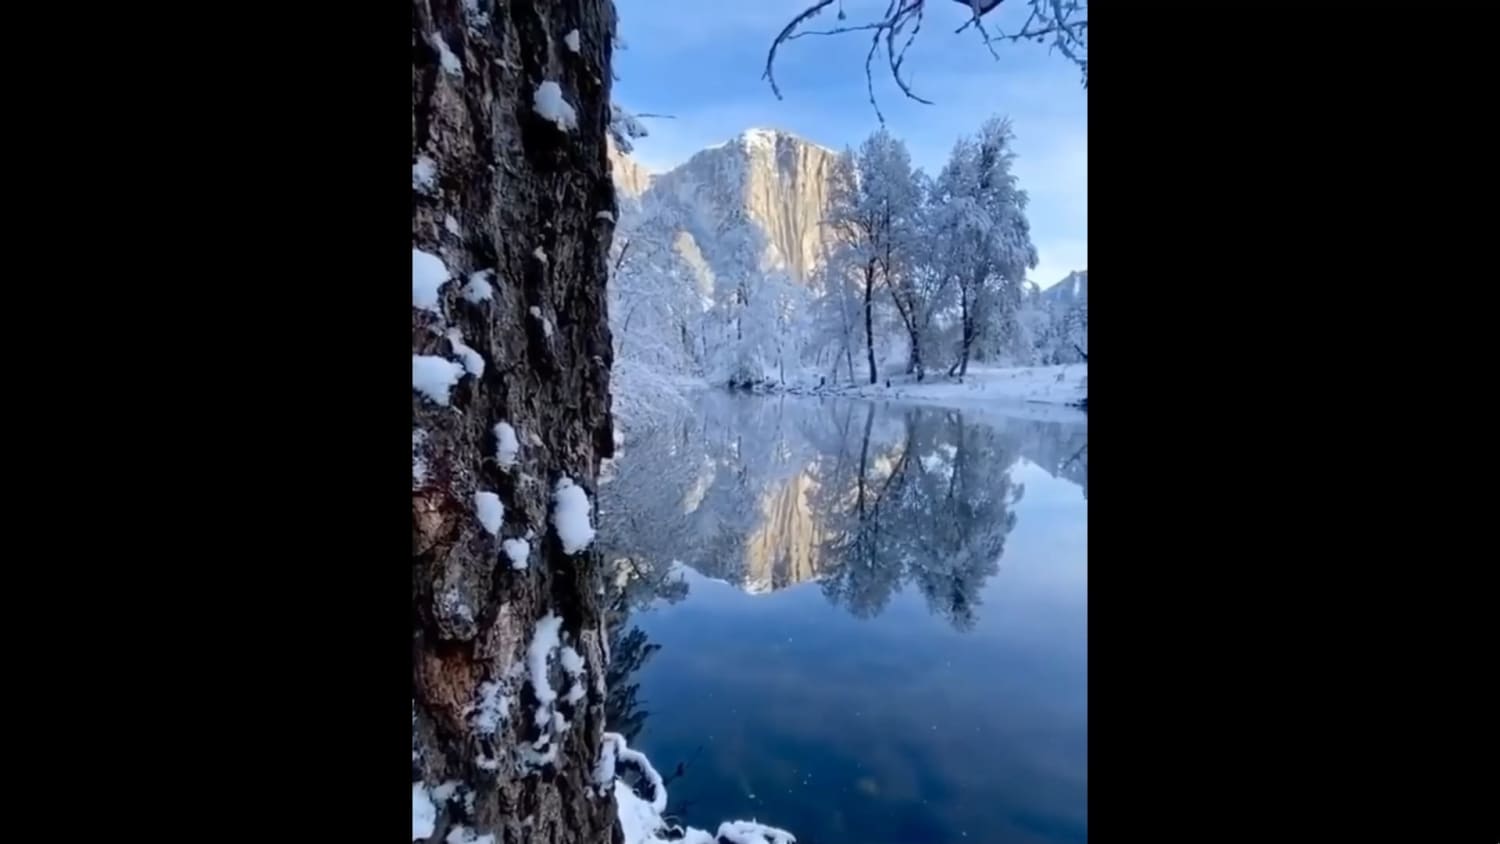 Yosemite National Park in The Winter.